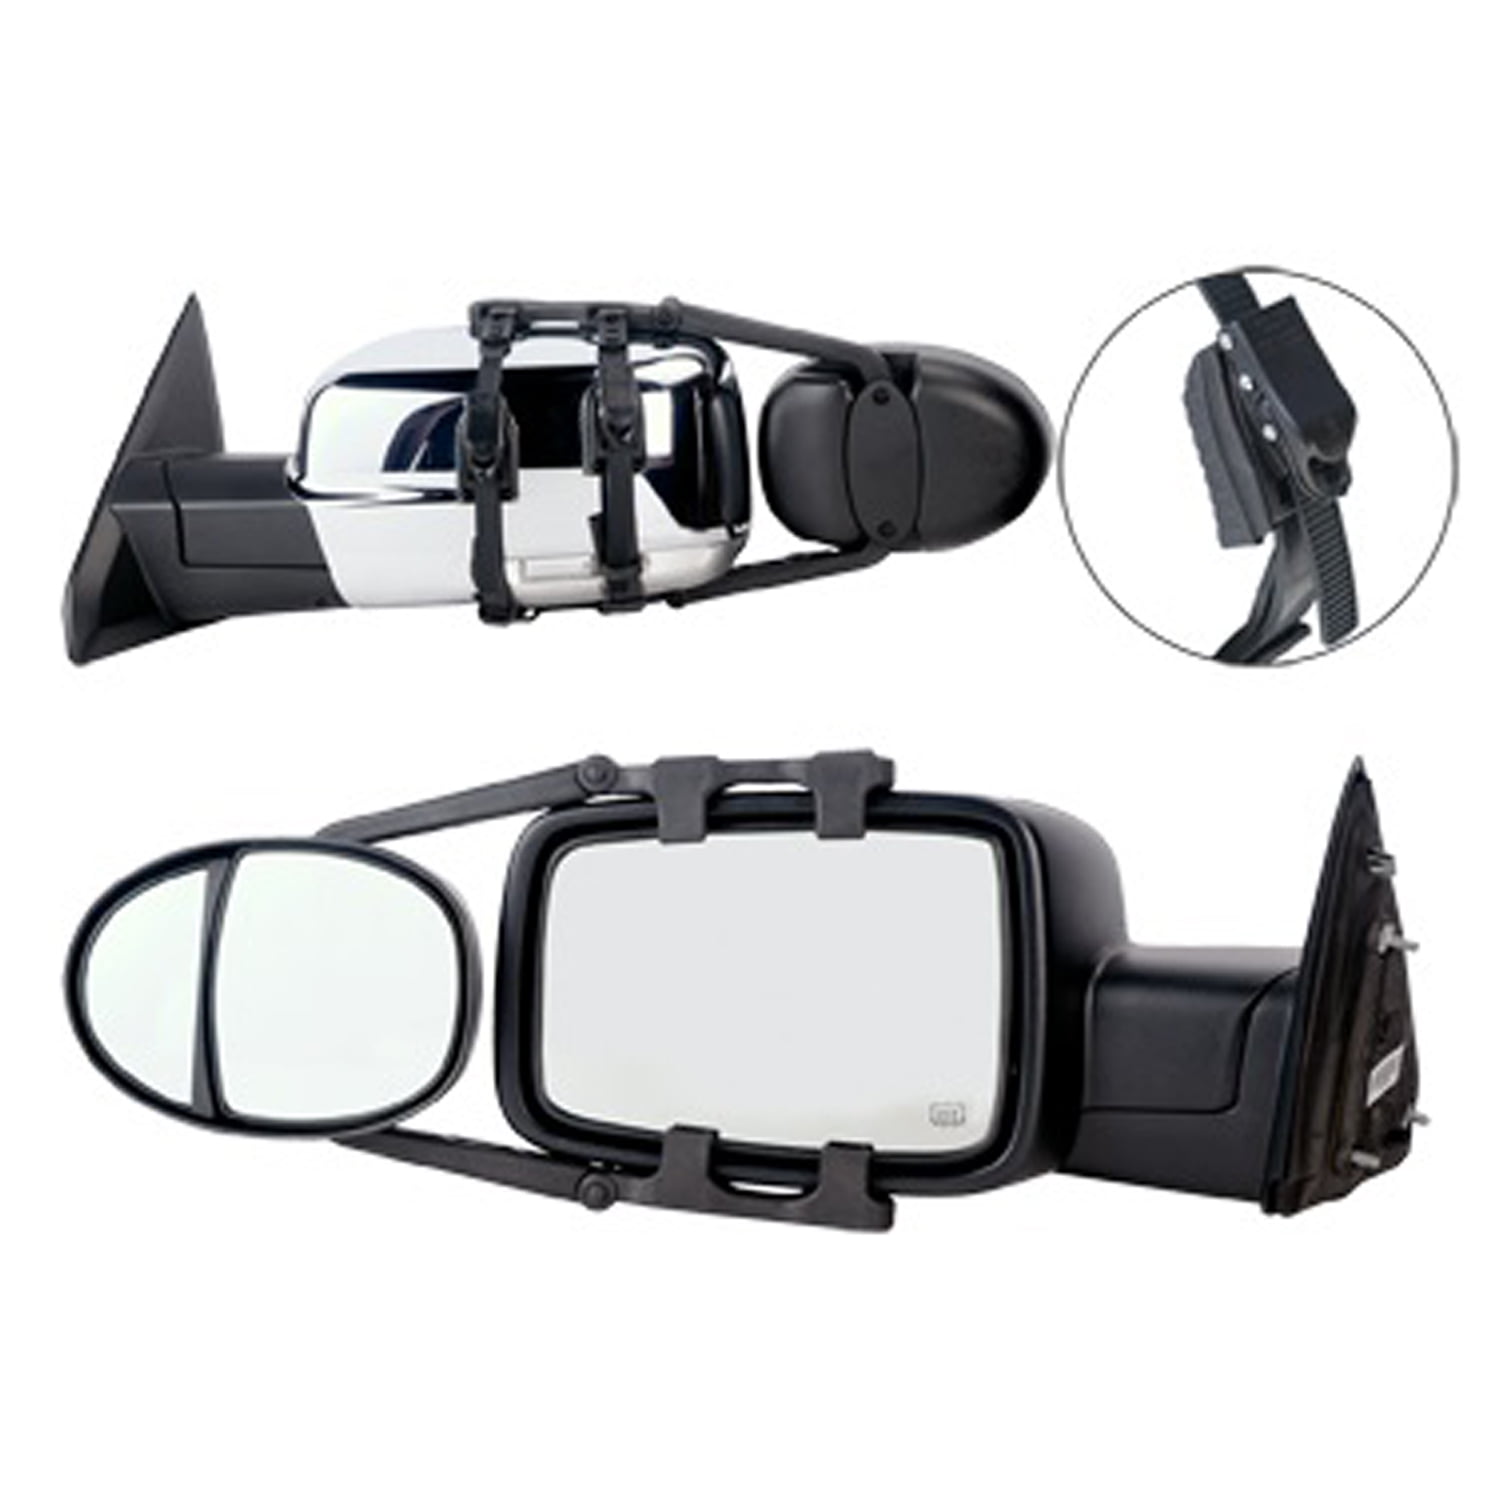 K Source 3990 Dual Lens Towing Mirror With Ratchet Mount System Pair 2008 Acura Rl 